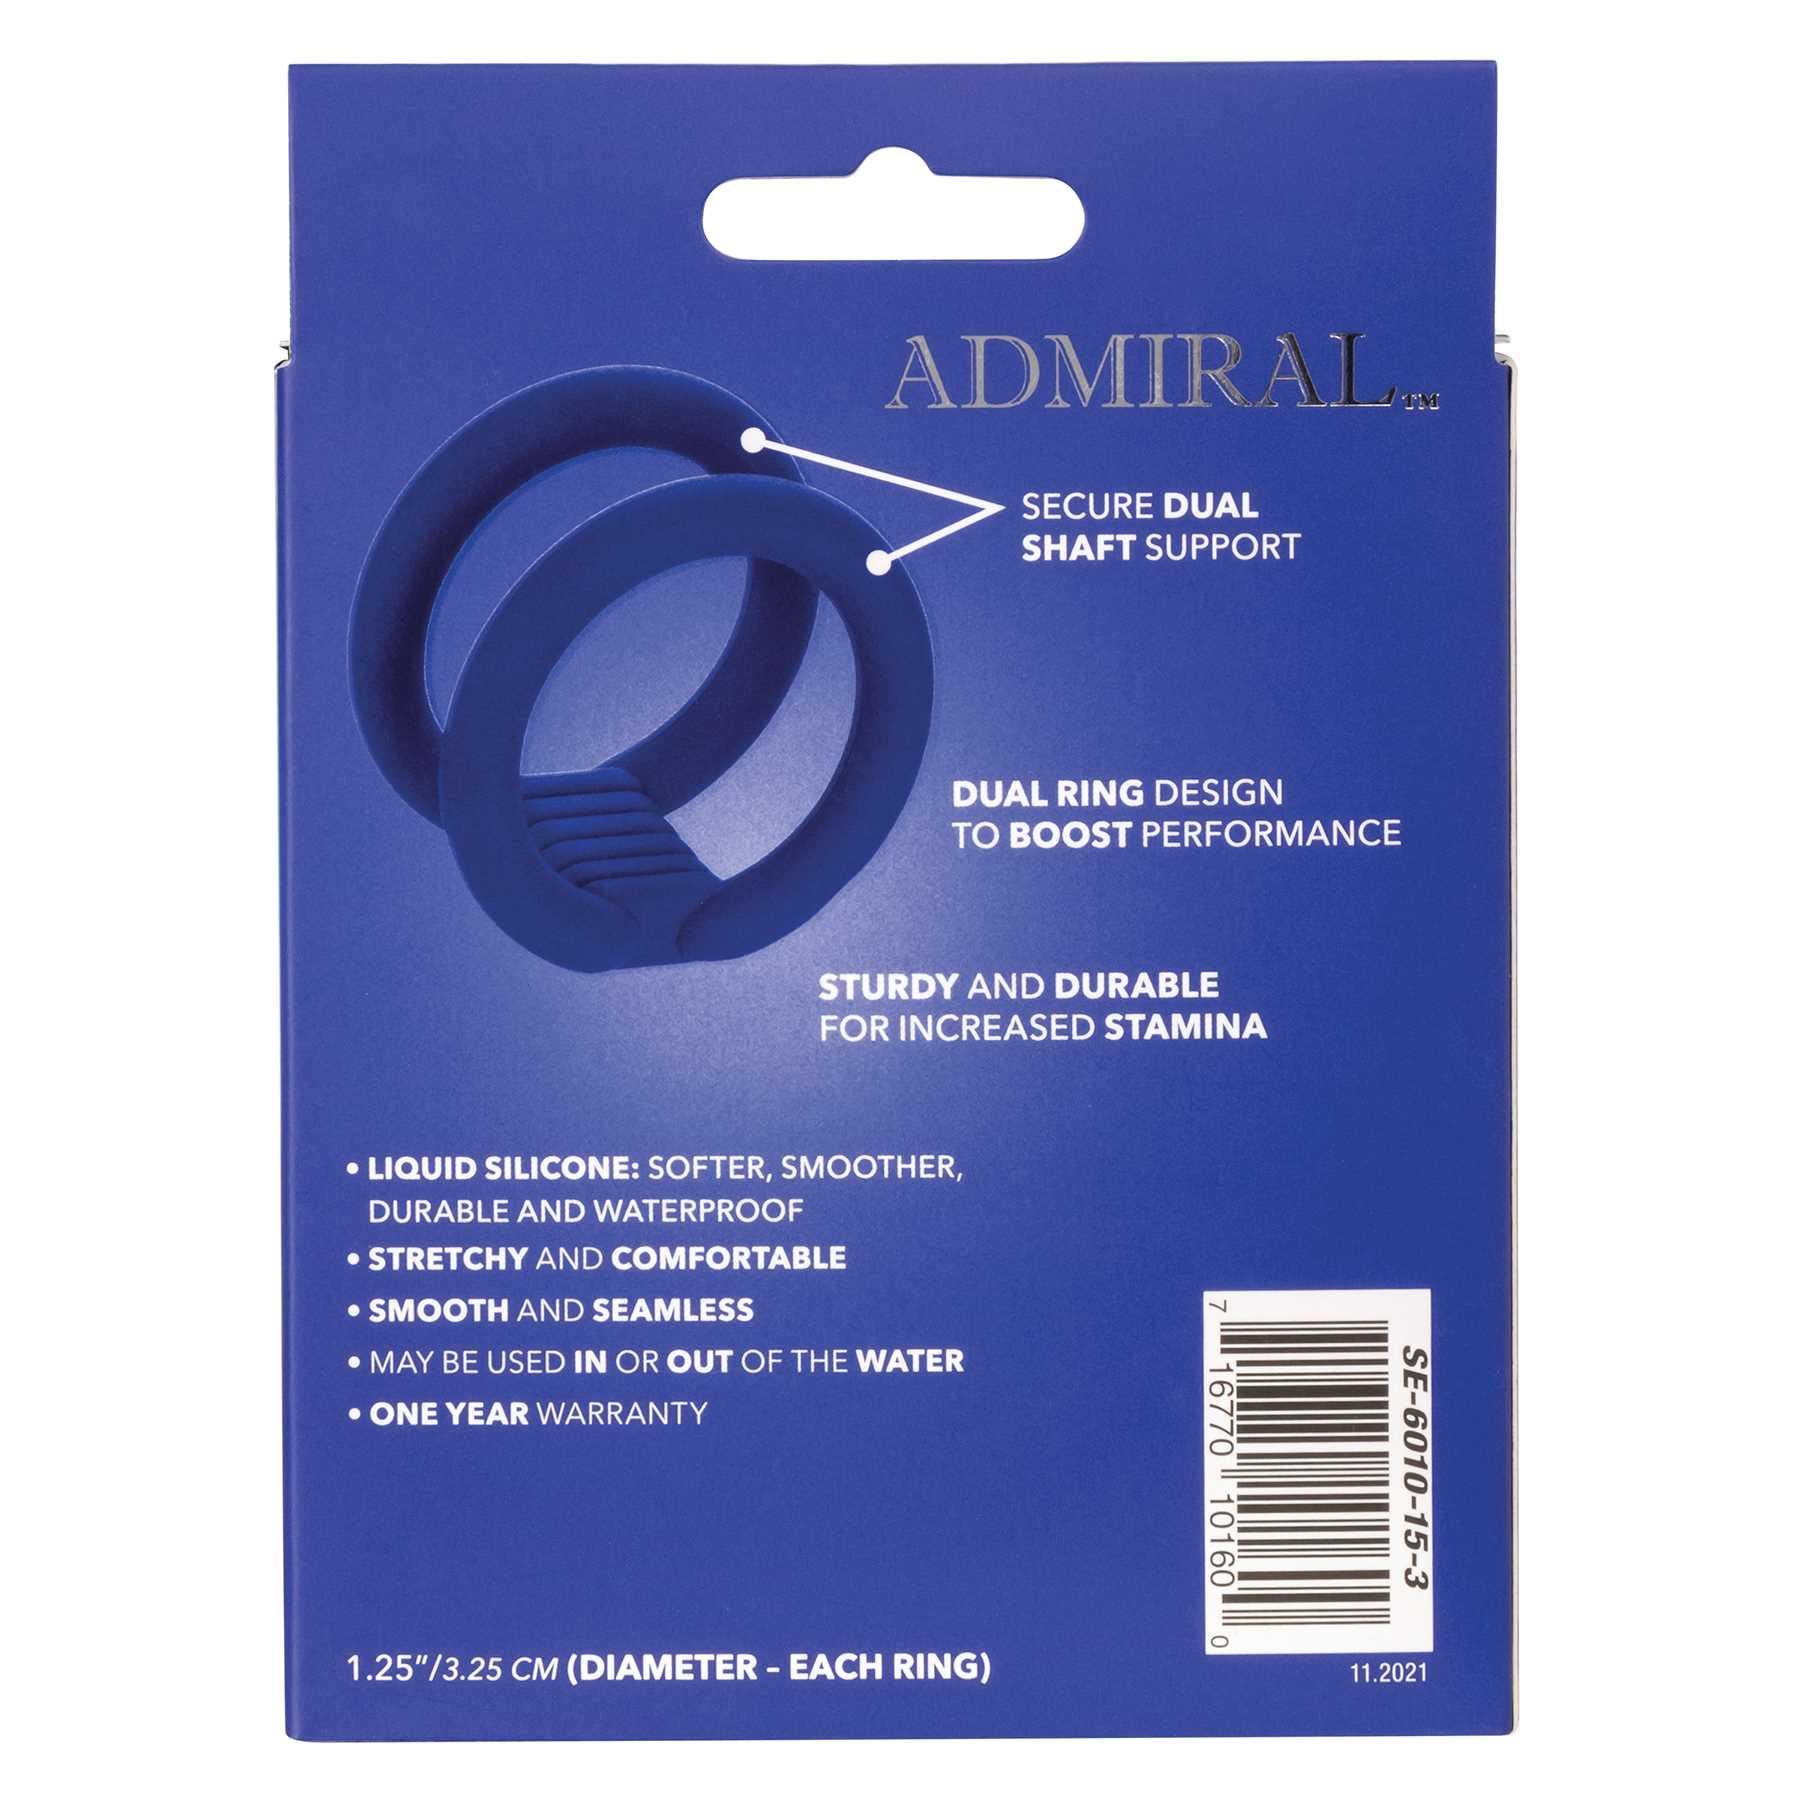 Admiral Dual Cock Cage rear box packaging